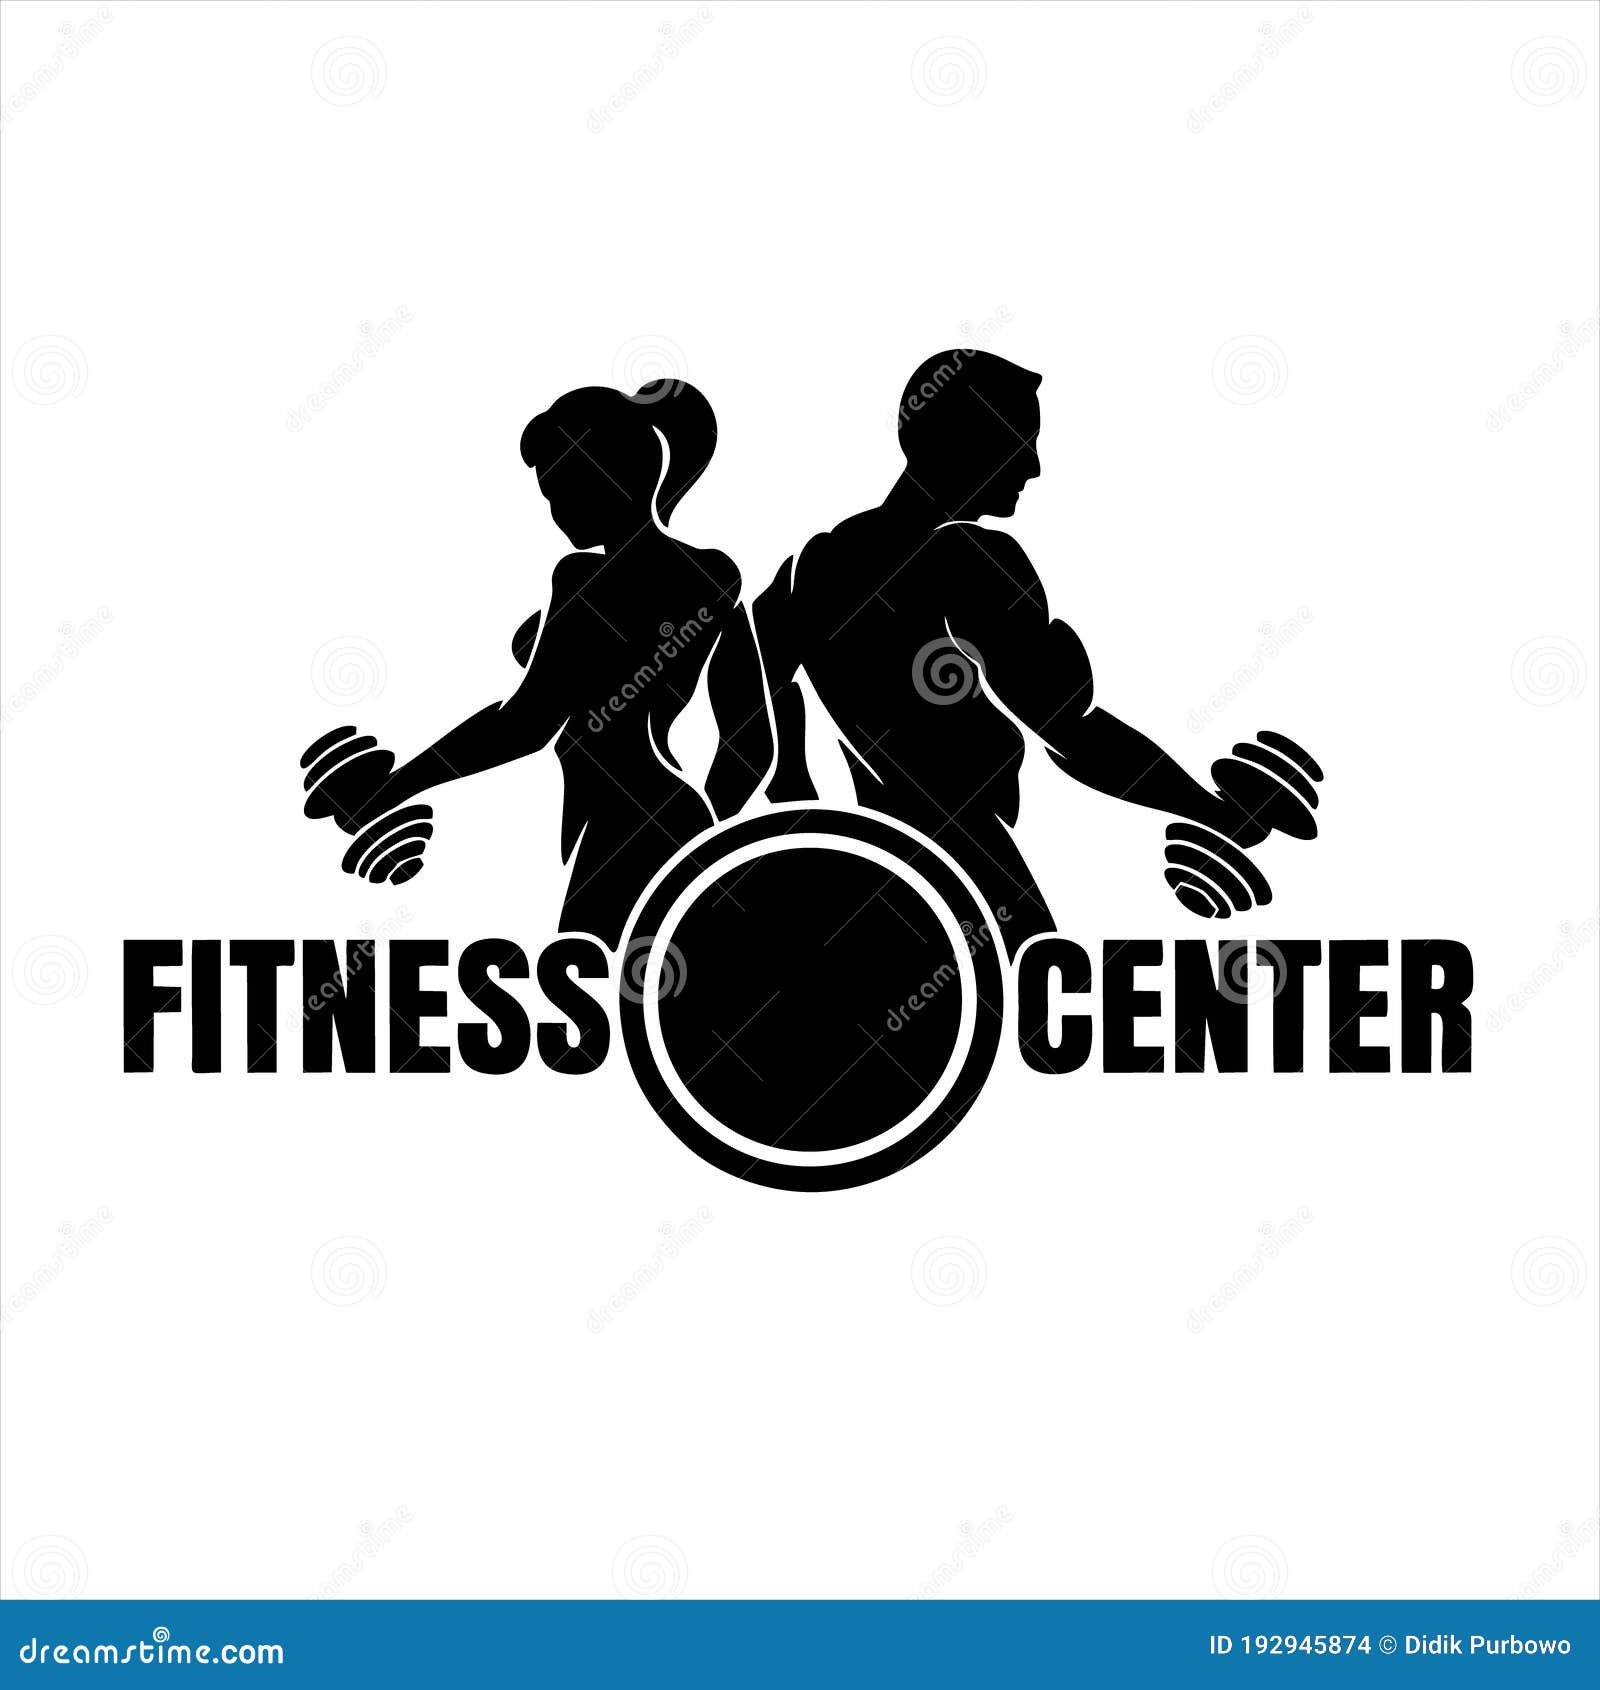 fitness club logo or emblem with woman and man silhouettes.